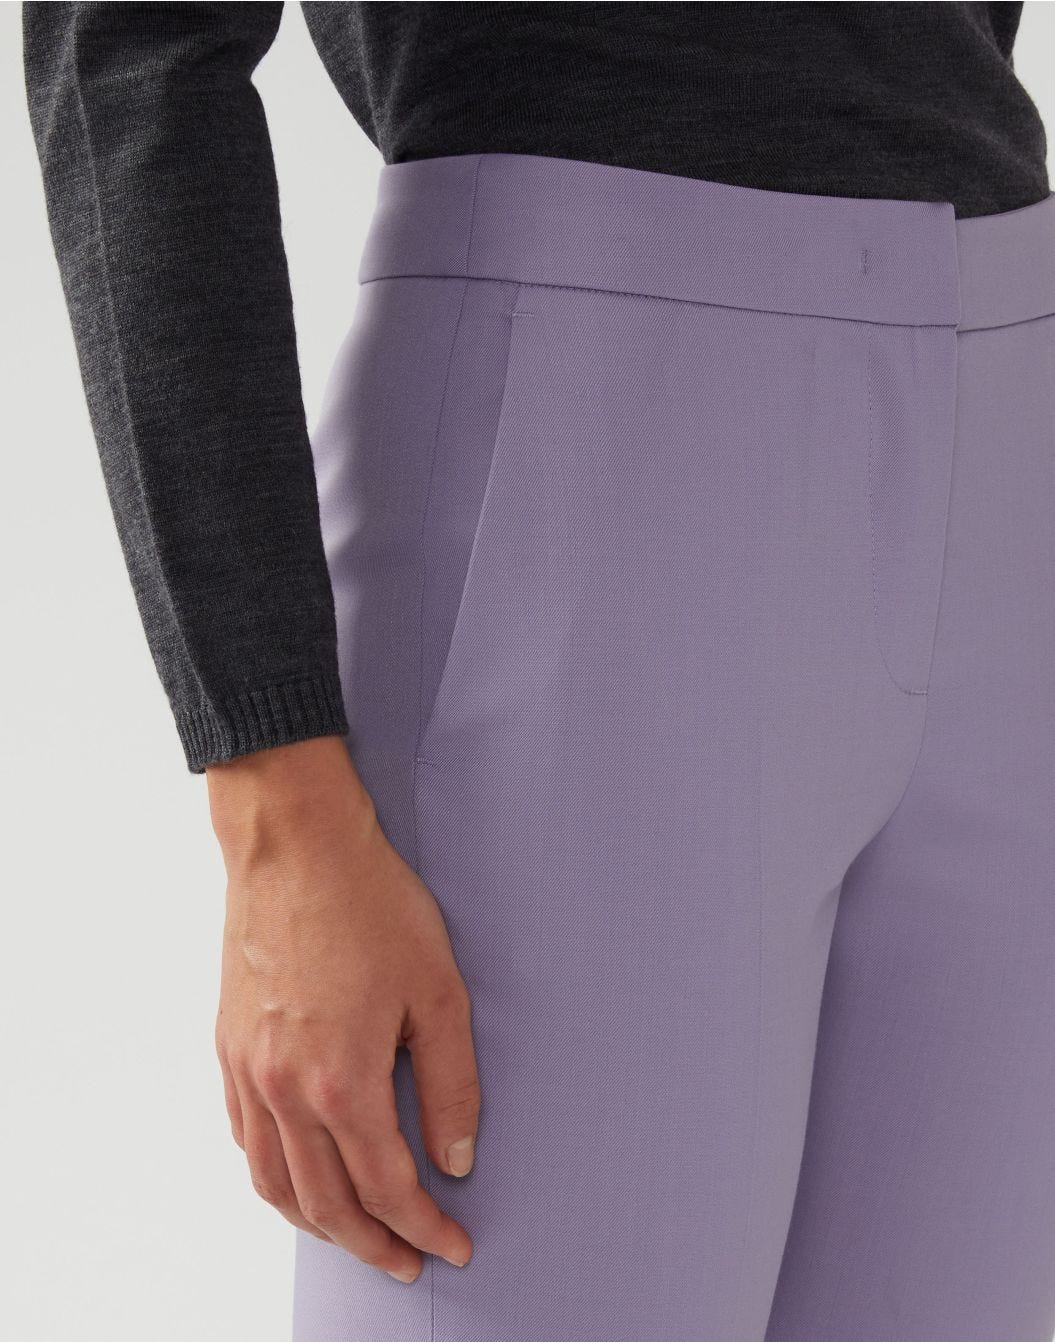 Bell-bottom trousers in cool lilac wool